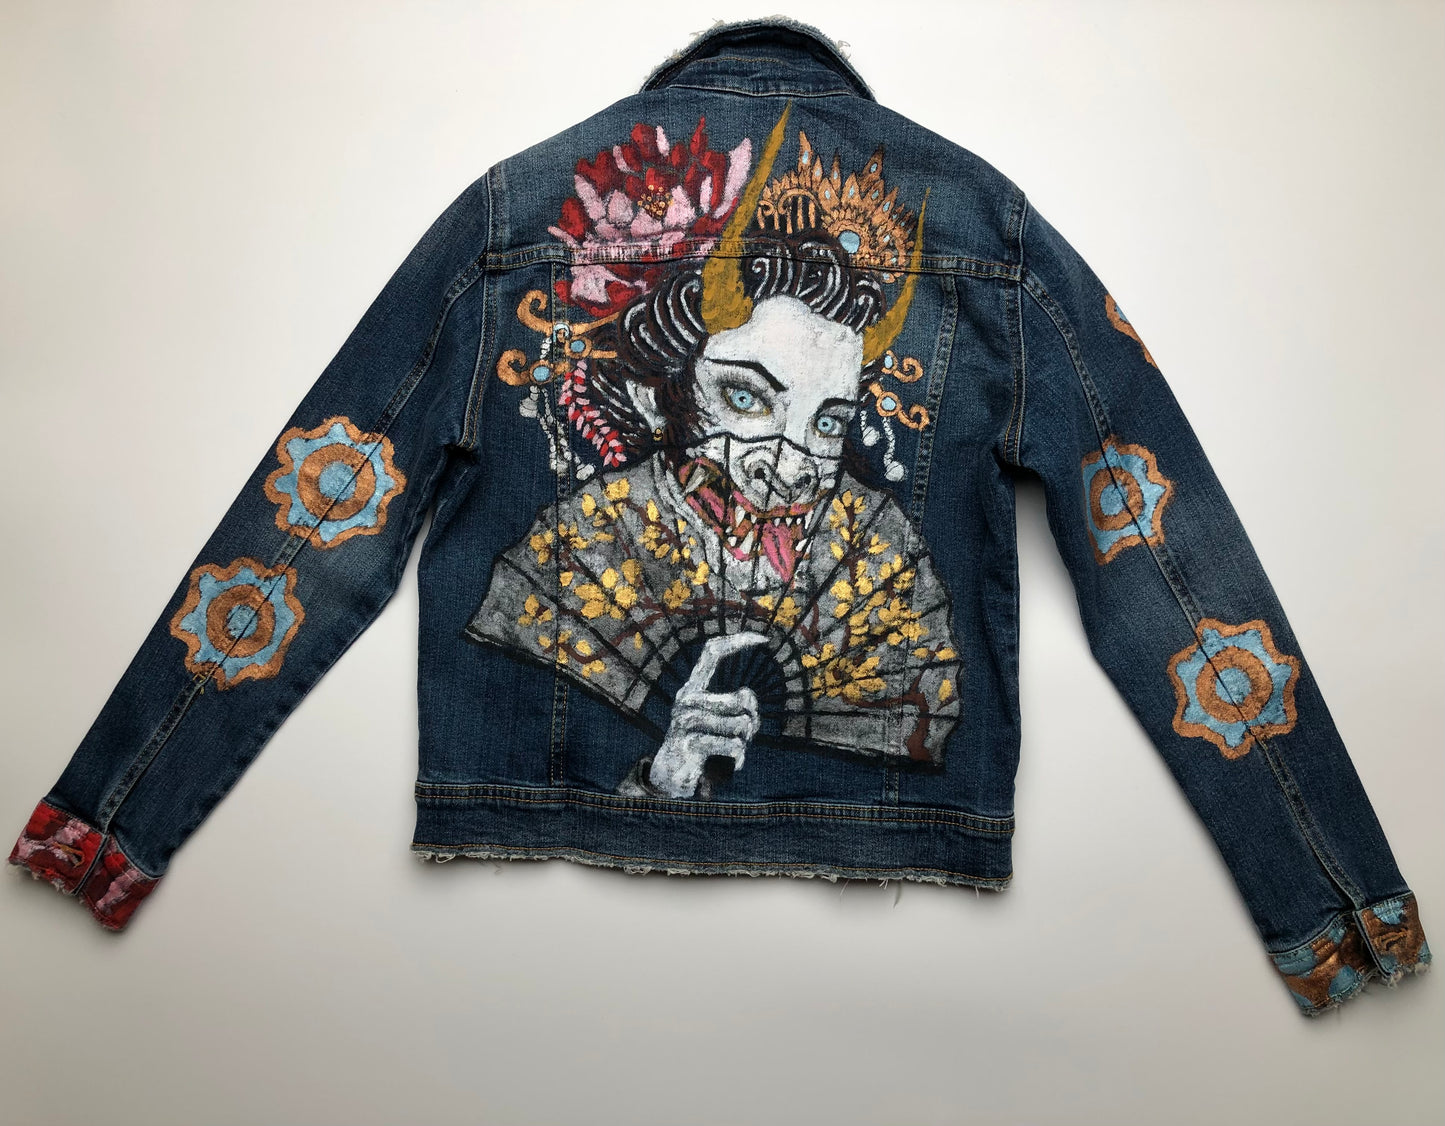 Painted demon on the back of a women's denim jacket